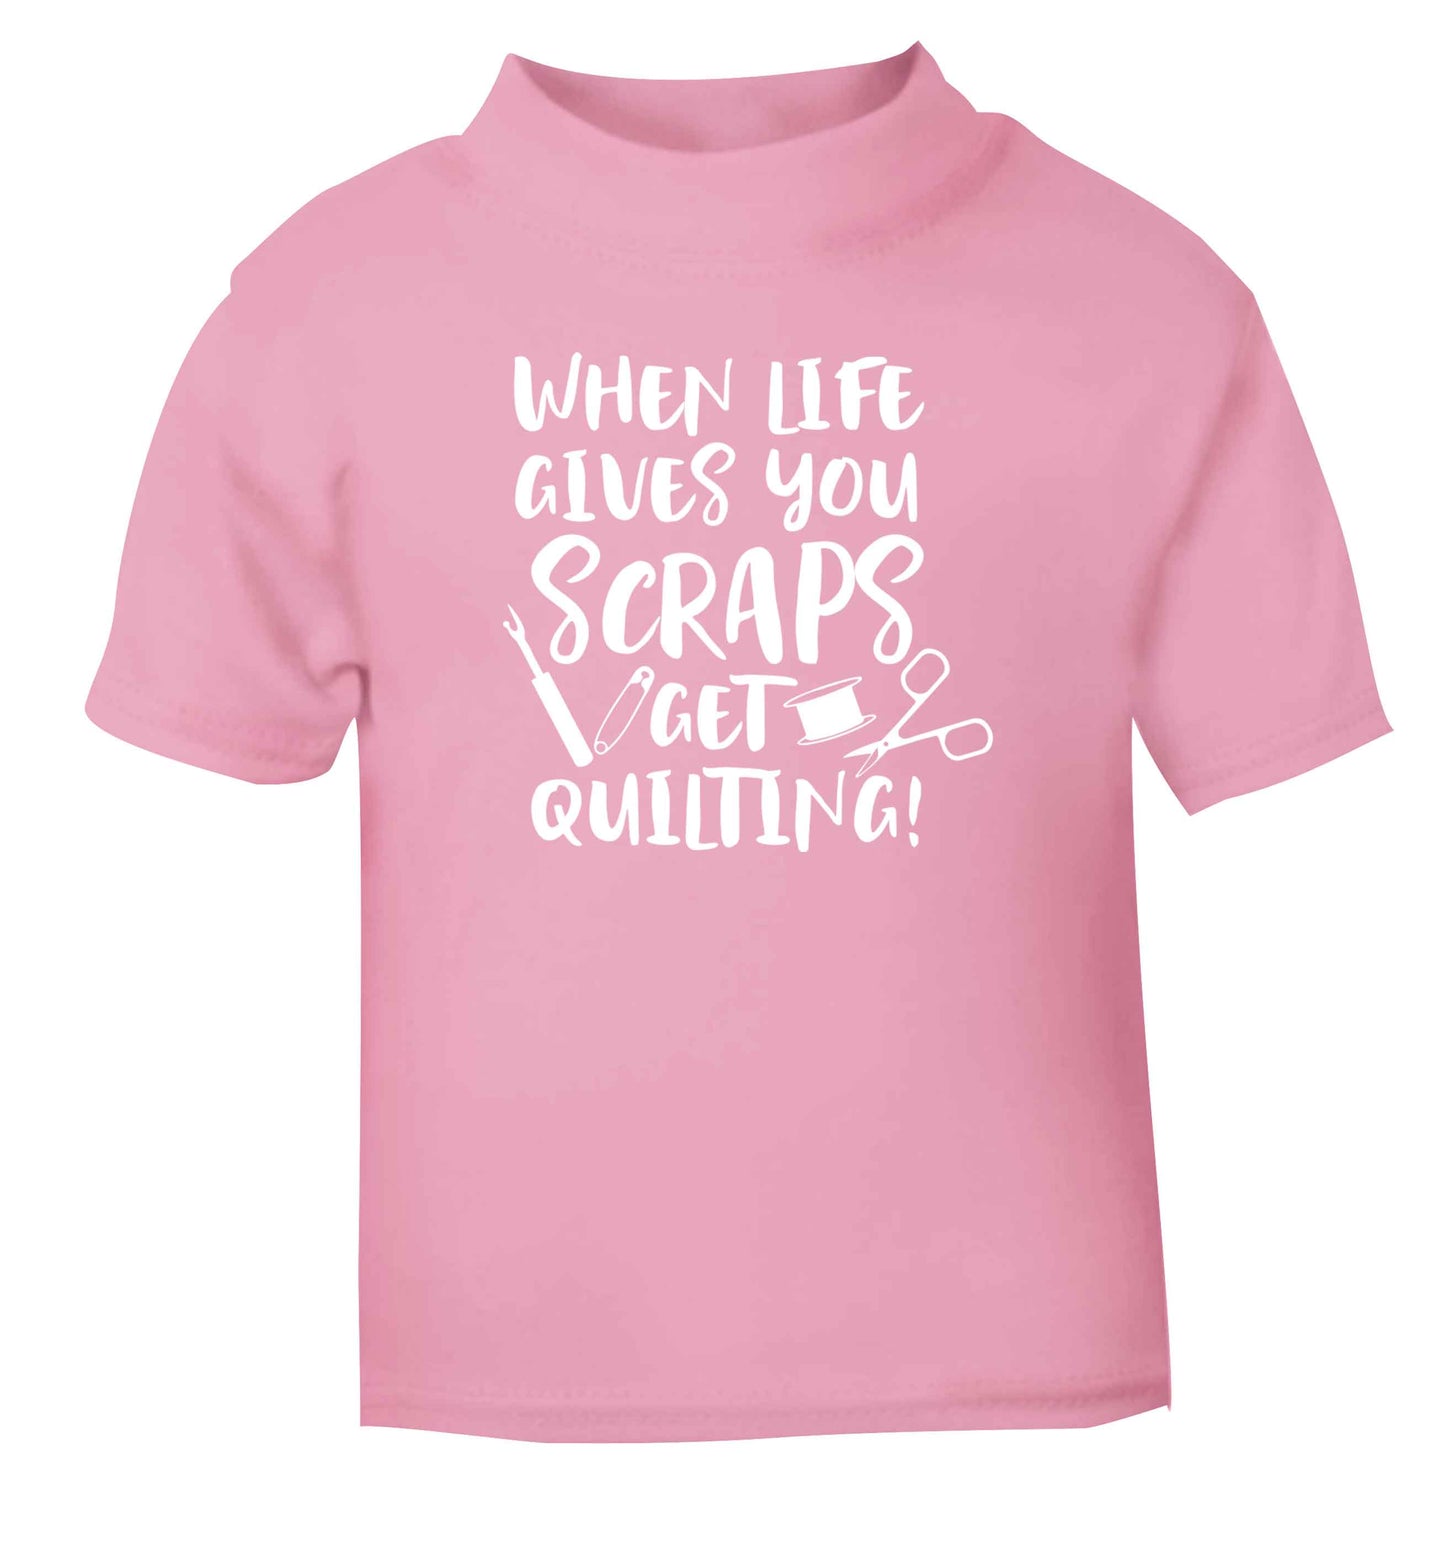 When life gives you scraps get quilting! light pink Baby Toddler Tshirt 2 Years